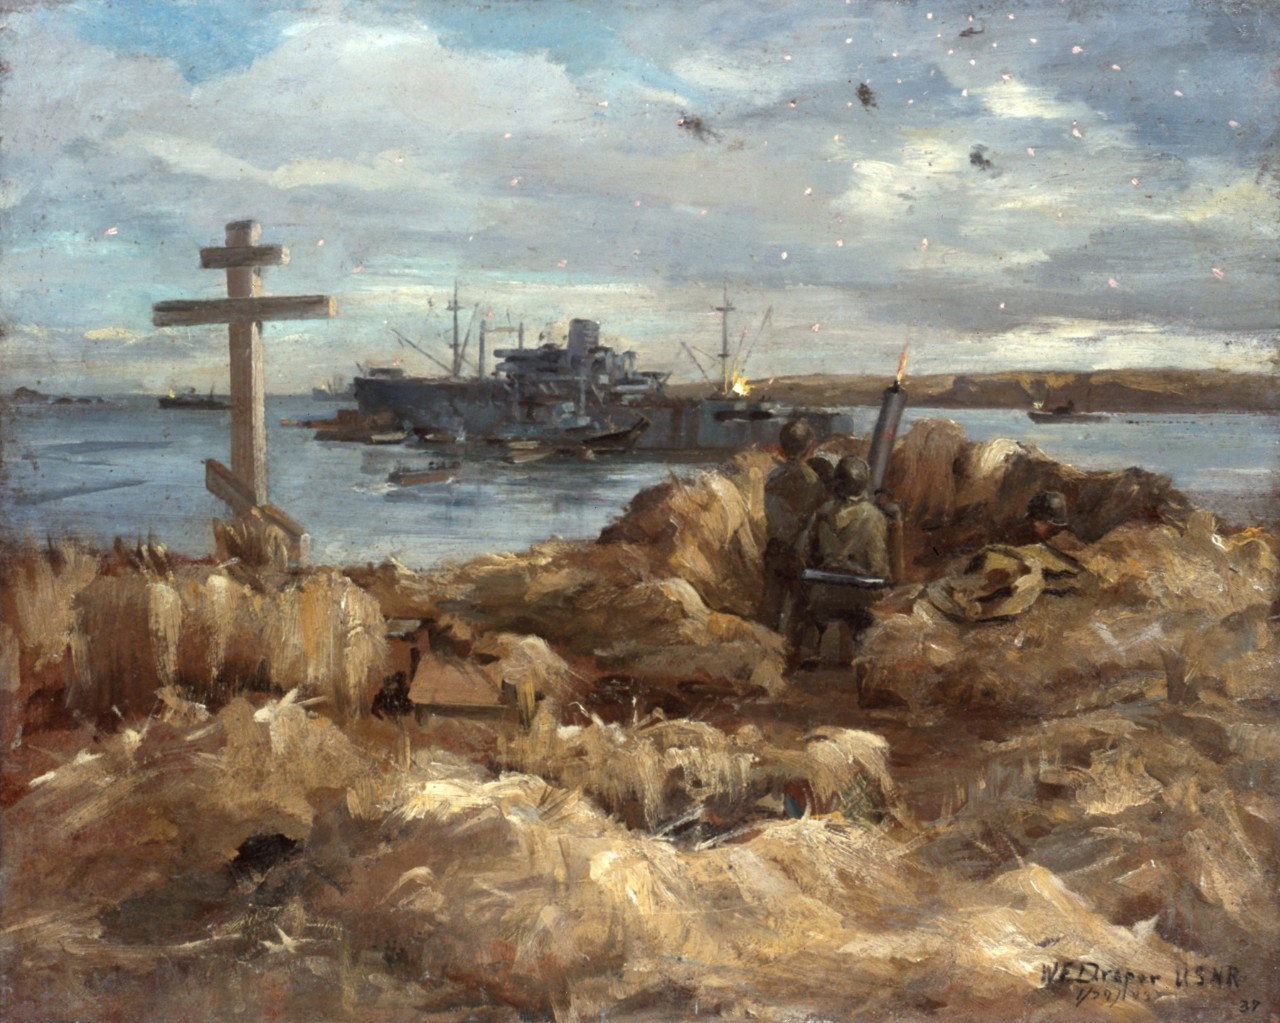 Oil painting of soldiers firing large weapon at planes in sky, near a cross grave marker.